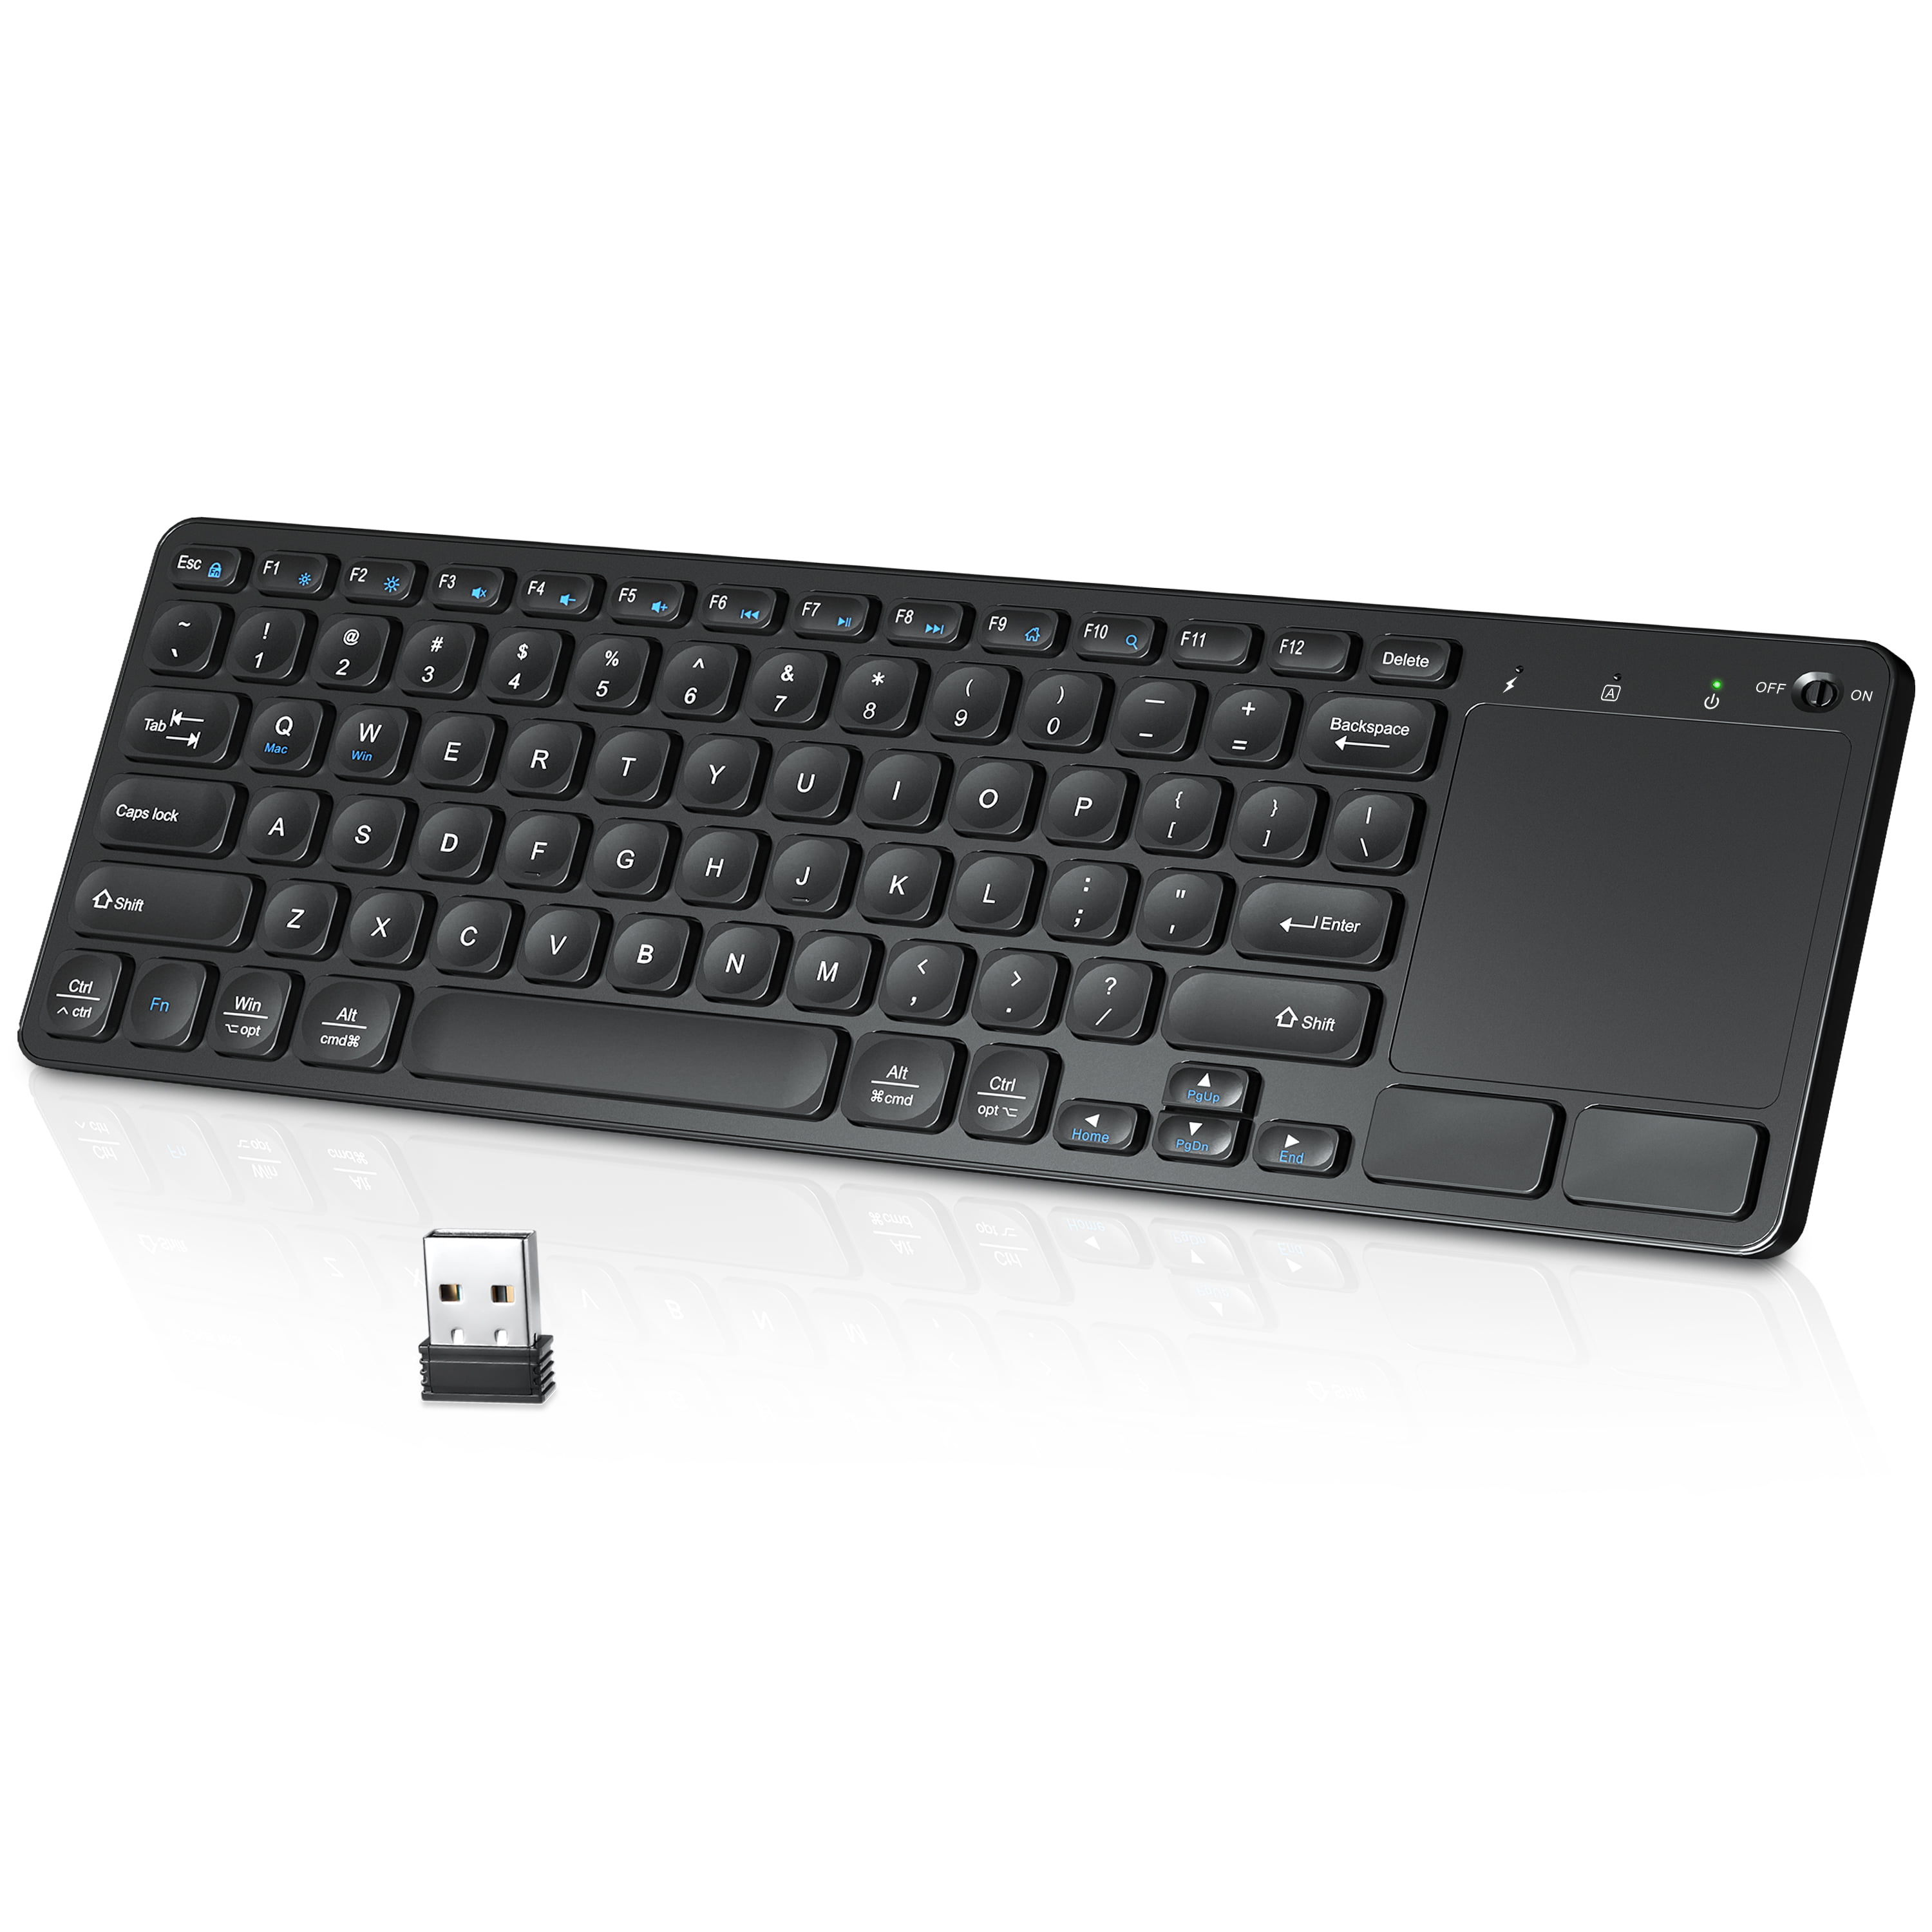 2.4GHz 26ft Wireless Keyboard and Mouse Combo Ultra-Thin Compact For PC Laptop 